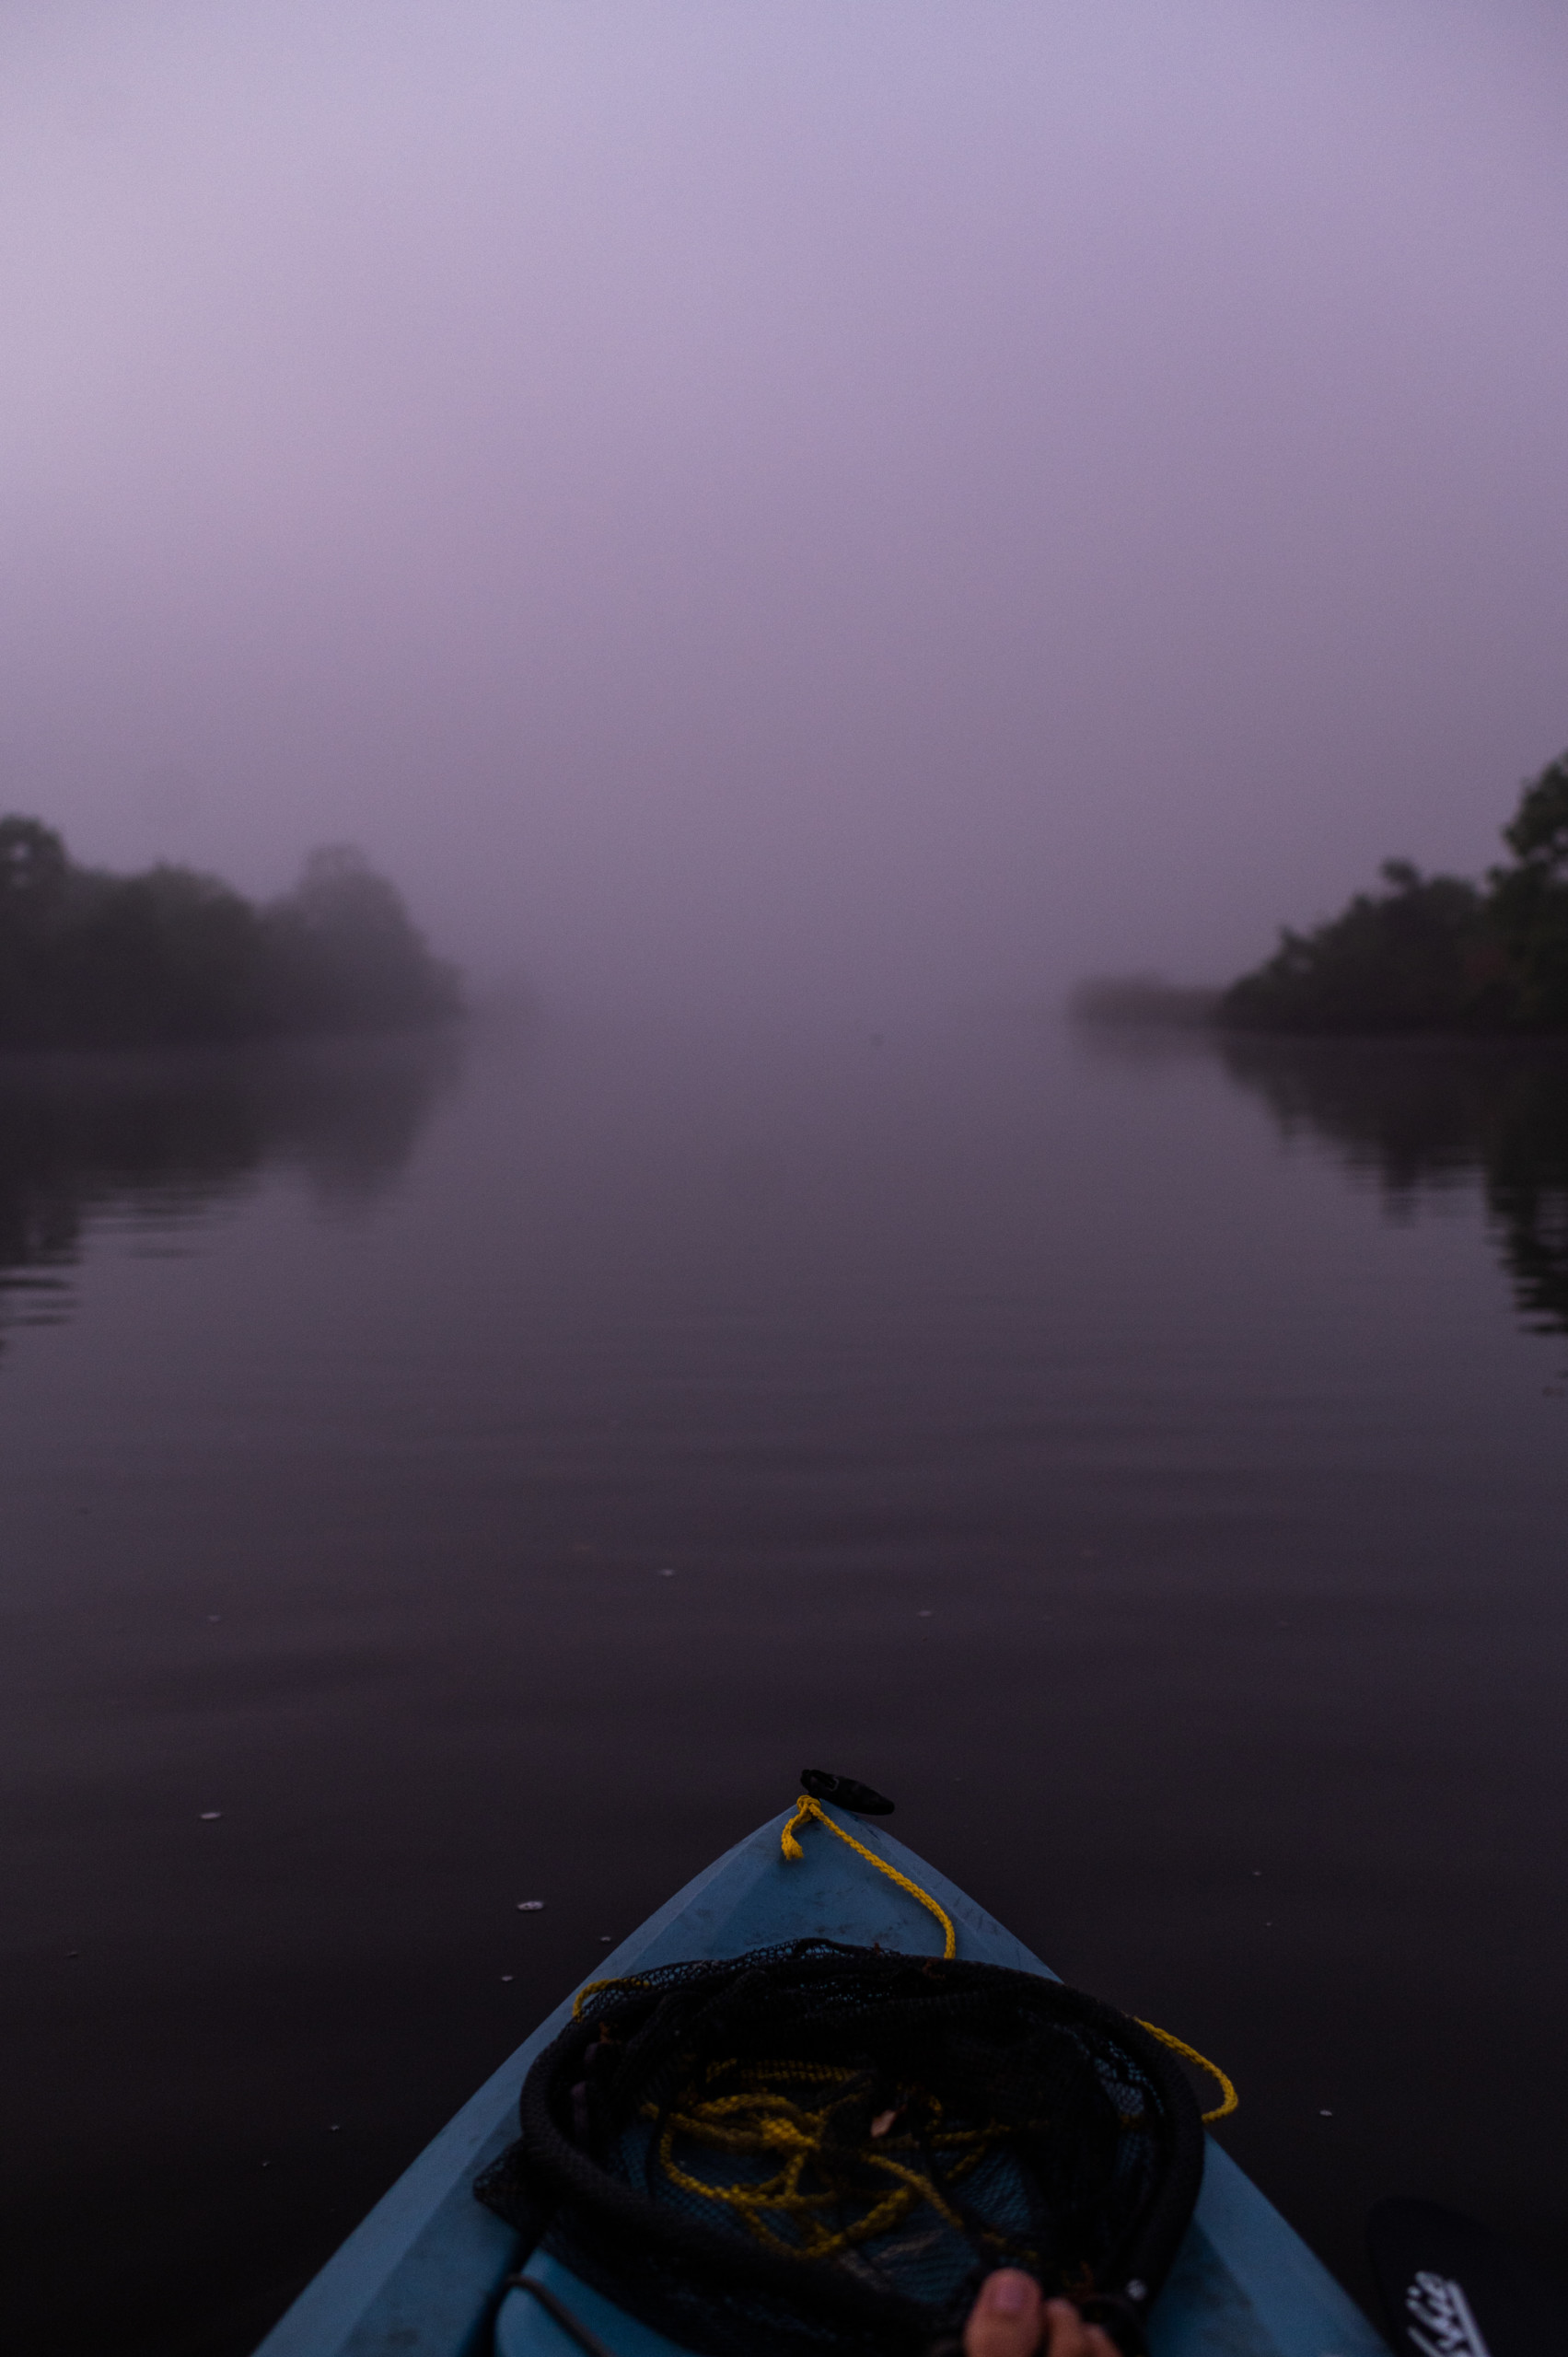 Fog in the Reggio Canal, as see from the kayak